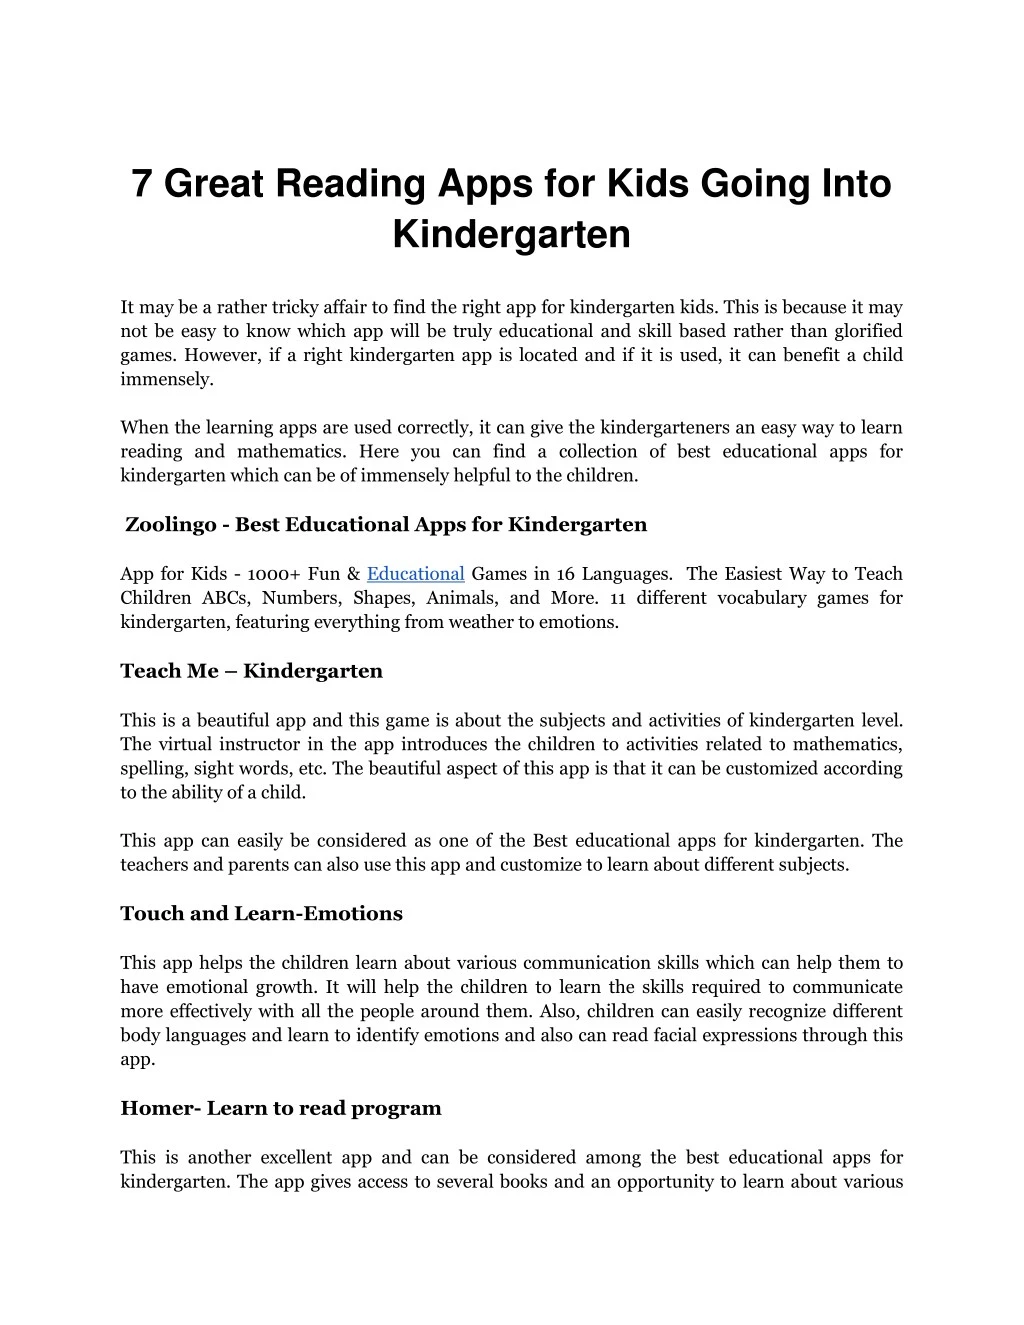 7 great reading apps for kids going into